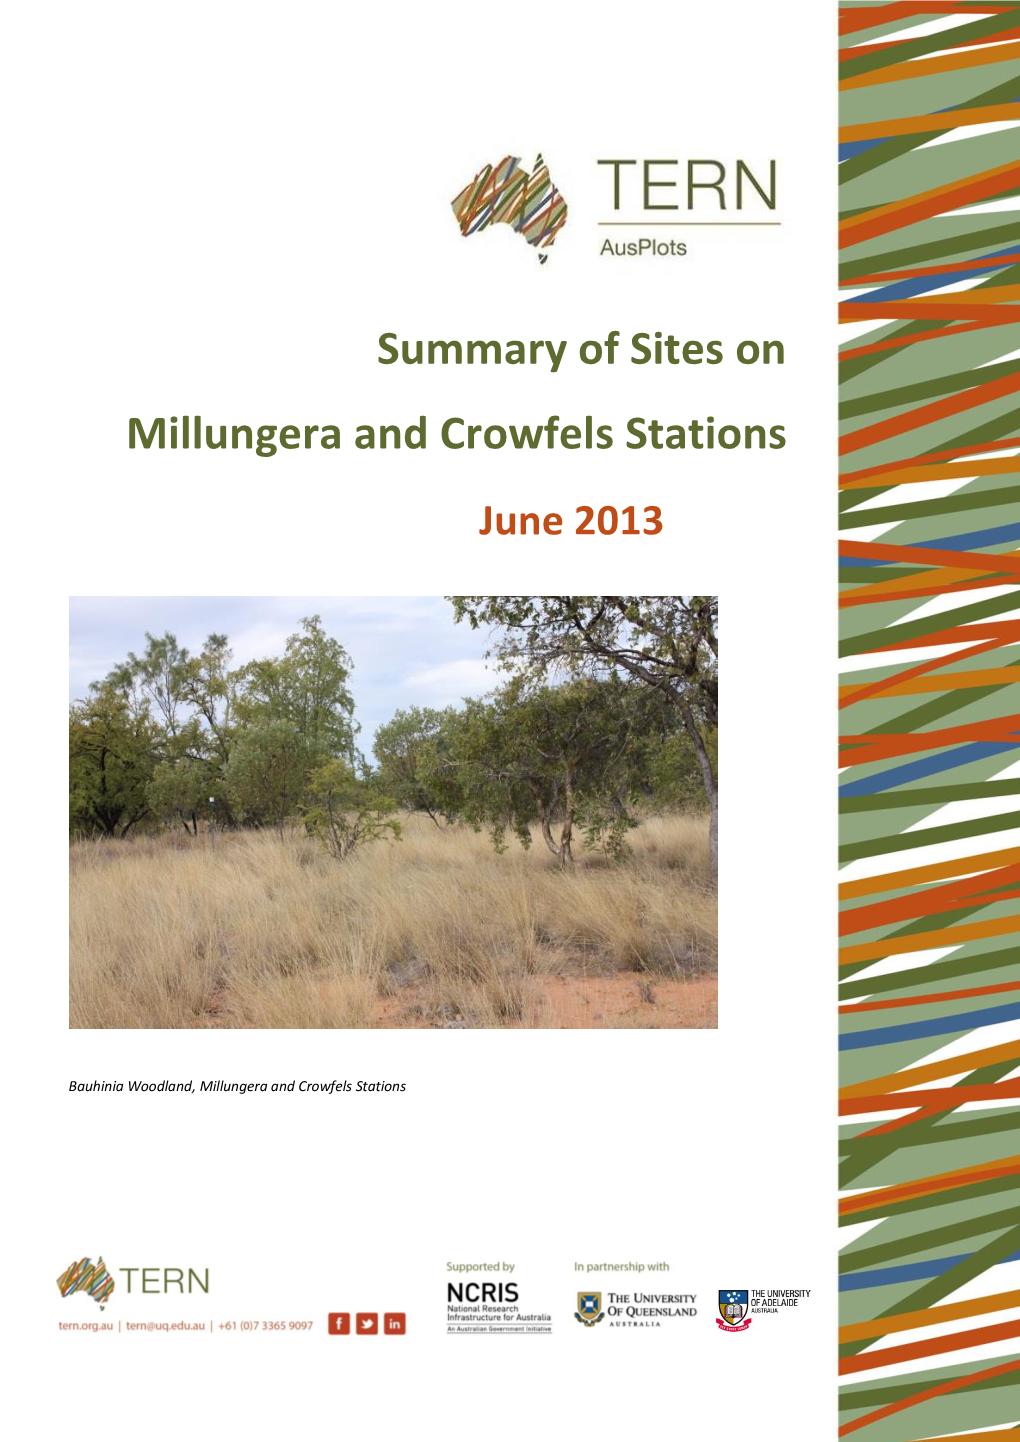 Summary of Sites on Millungera and Crowfels Stations